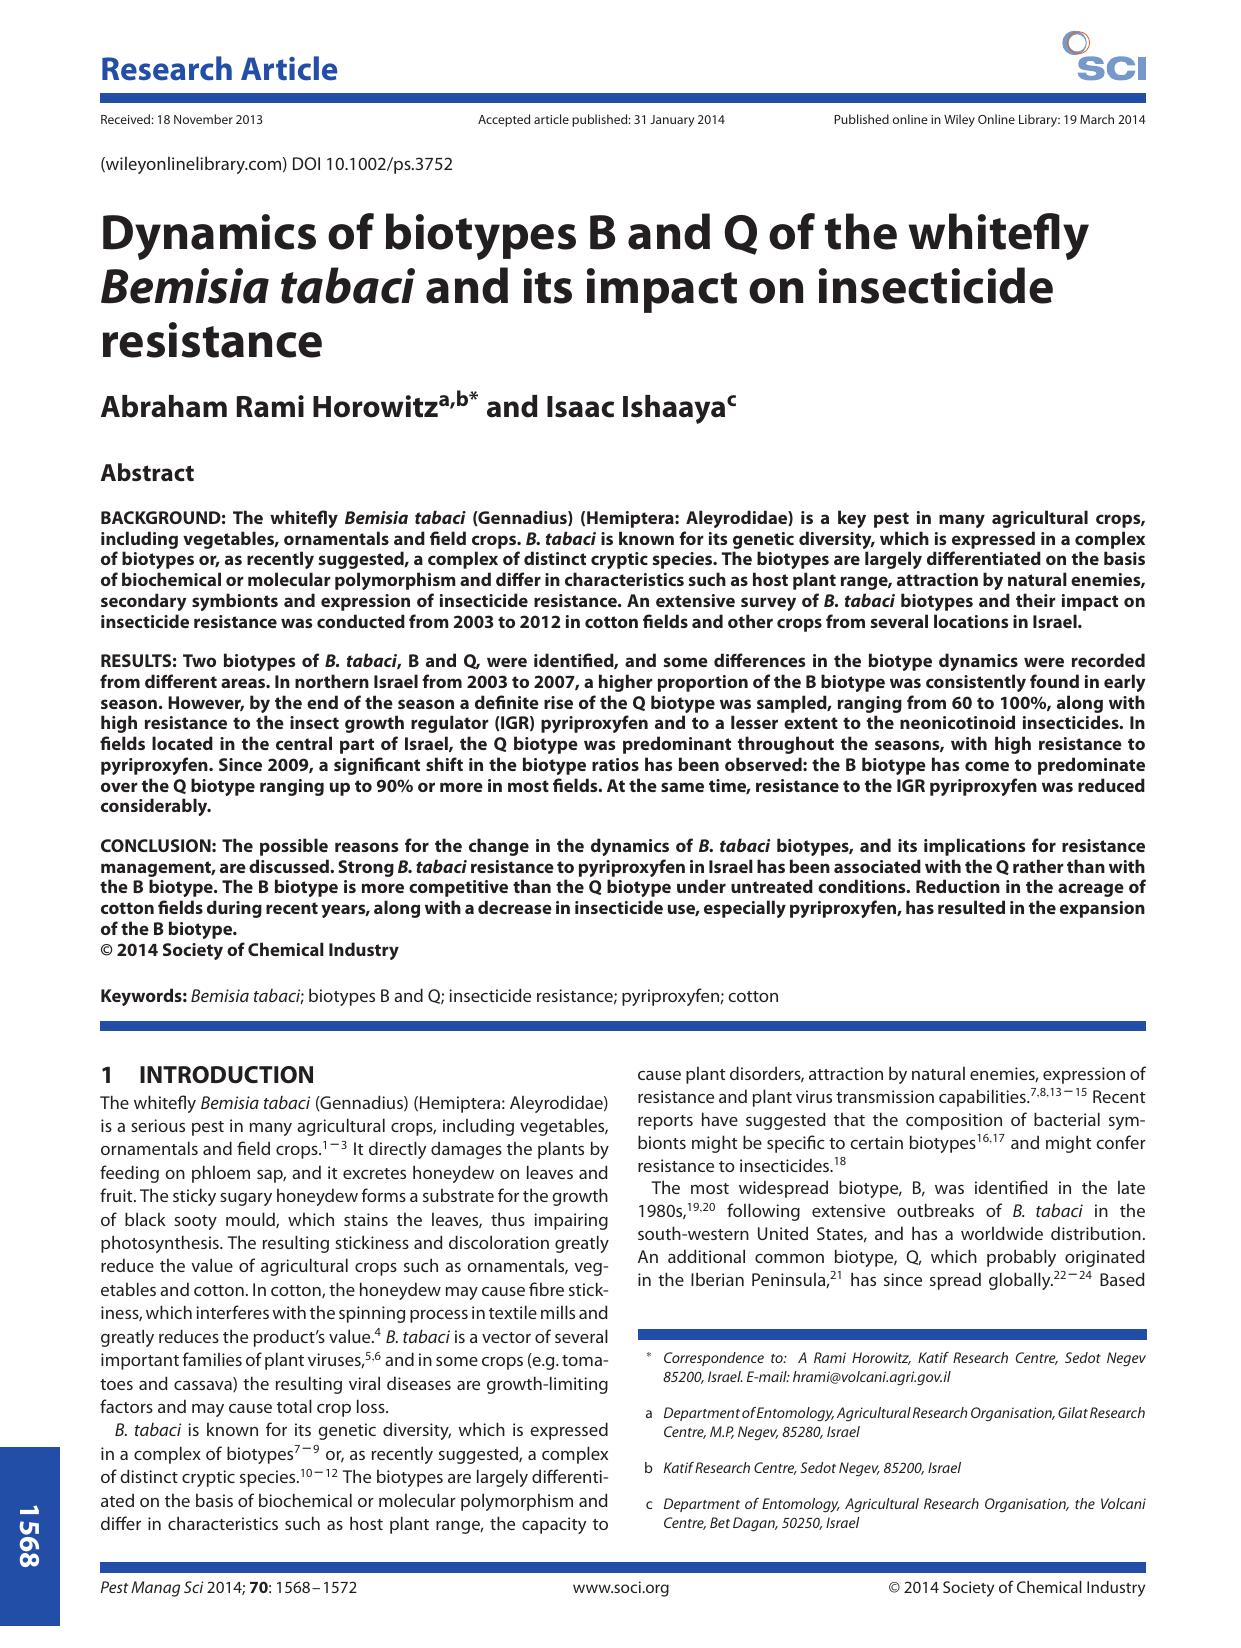 Dynamics of biotypes B and Q of the whitefly Bemisia tabaci and its impact on insecticide resistance by Unknown